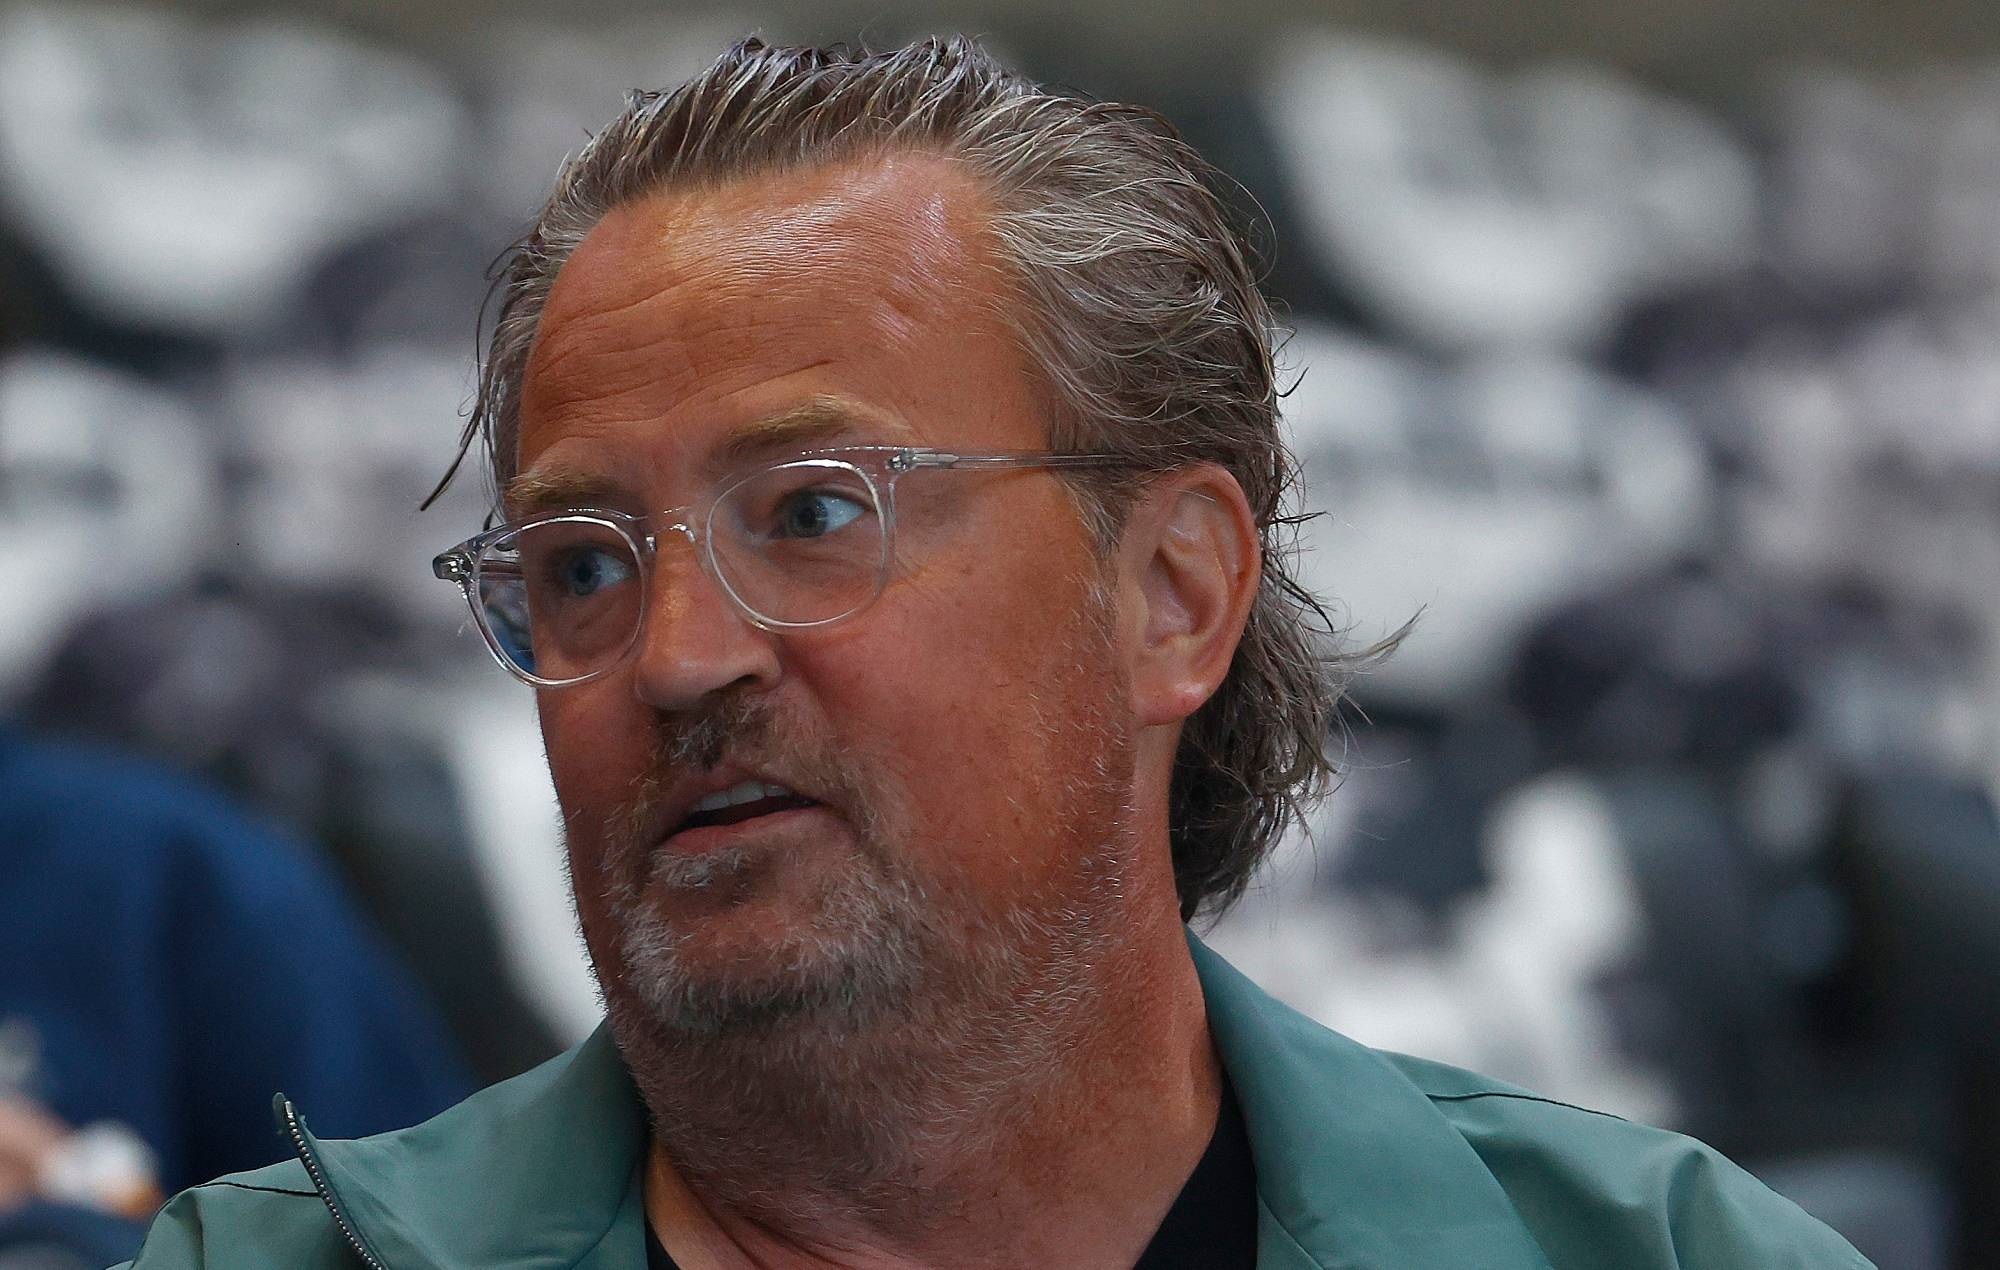 Matthew Perry’s initial post-mortem report “inconclusive”